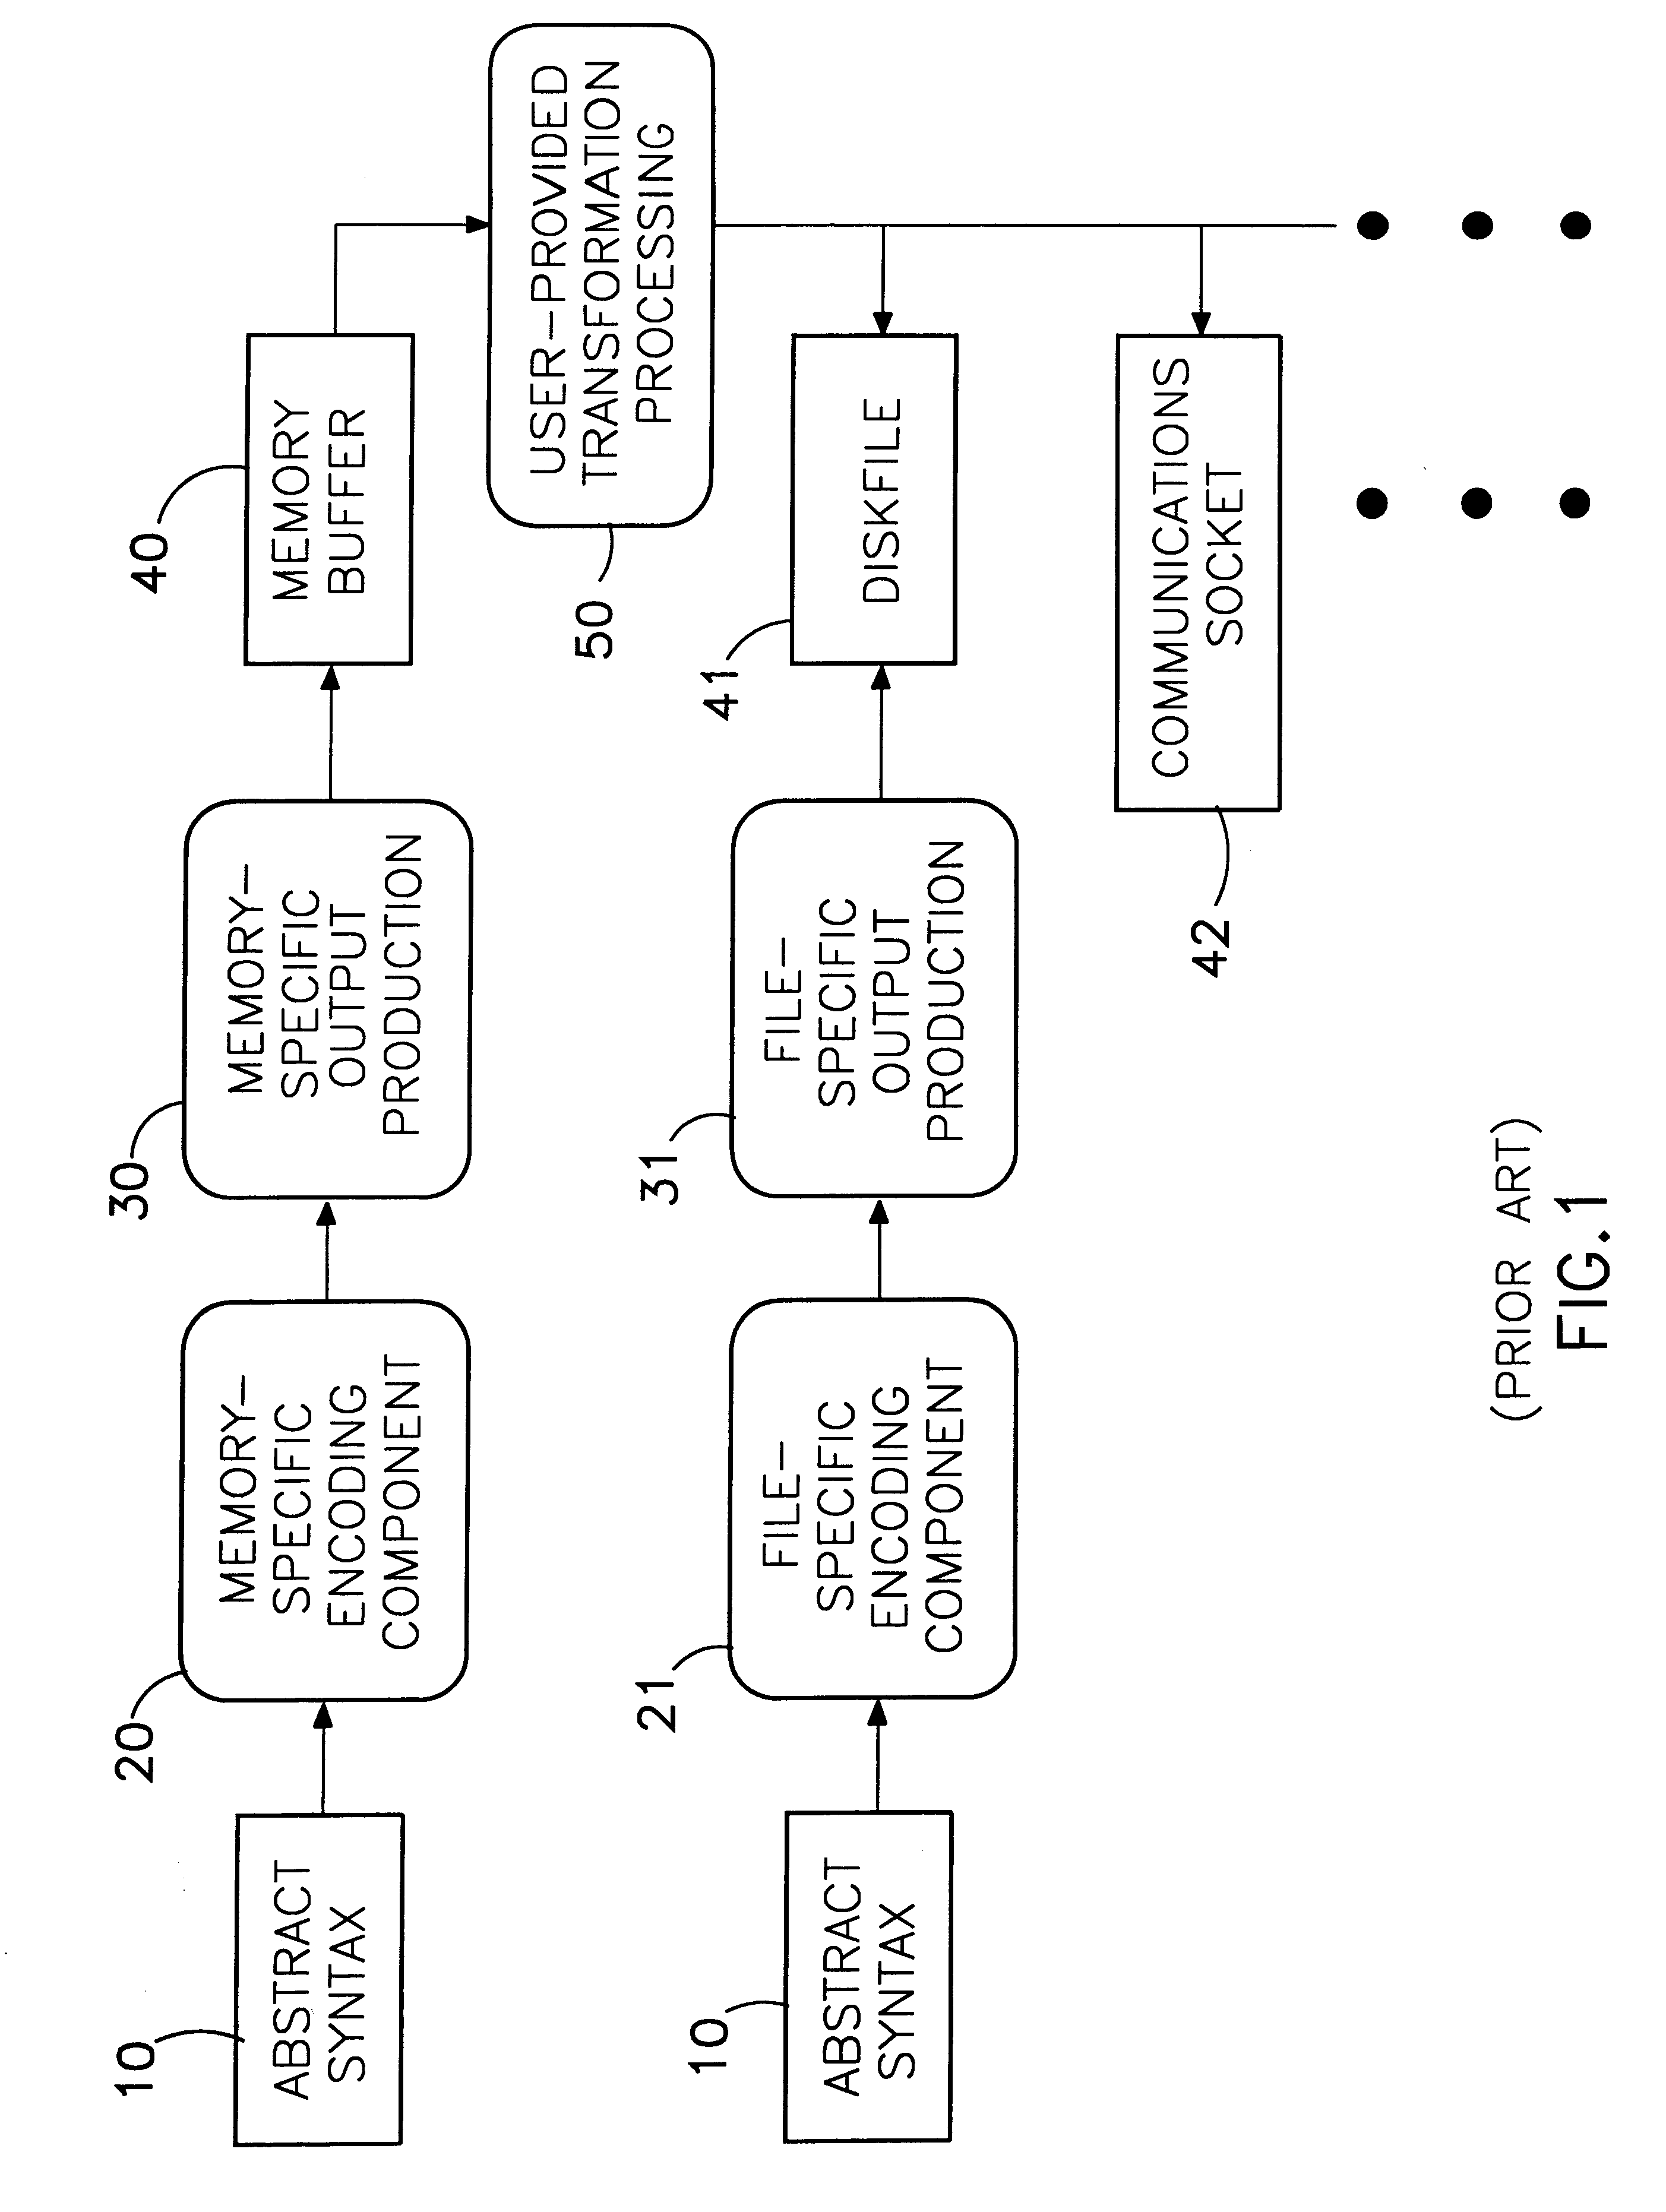 Octet iterator template interface for protocol transfer syntax coding services